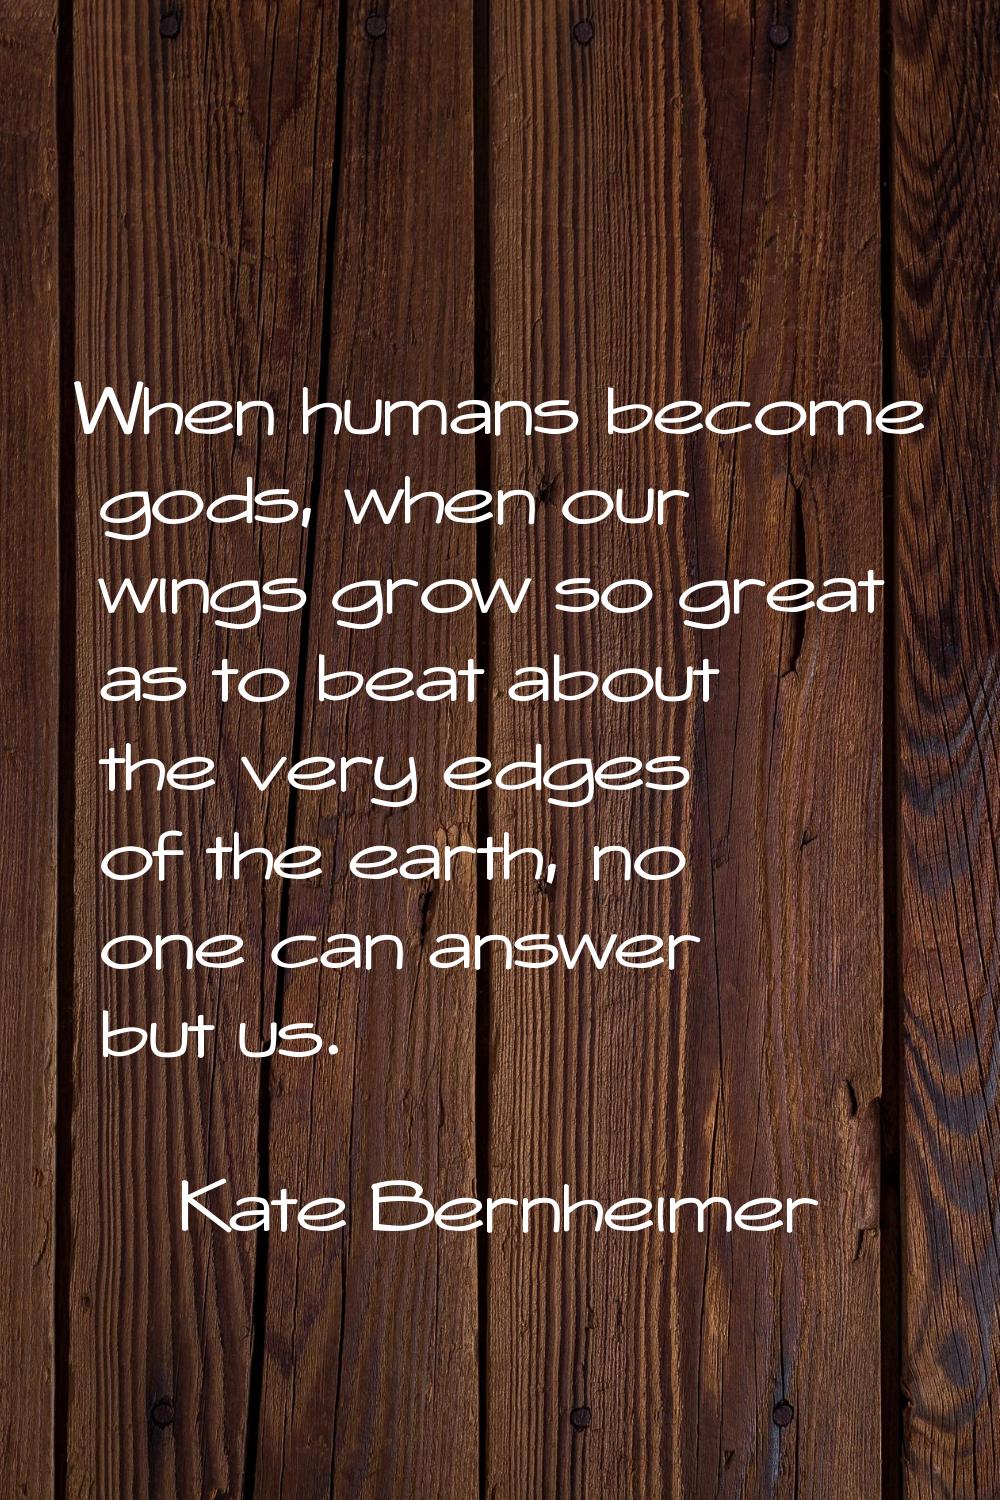 When humans become gods, when our wings grow so great as to beat about the very edges of the earth,